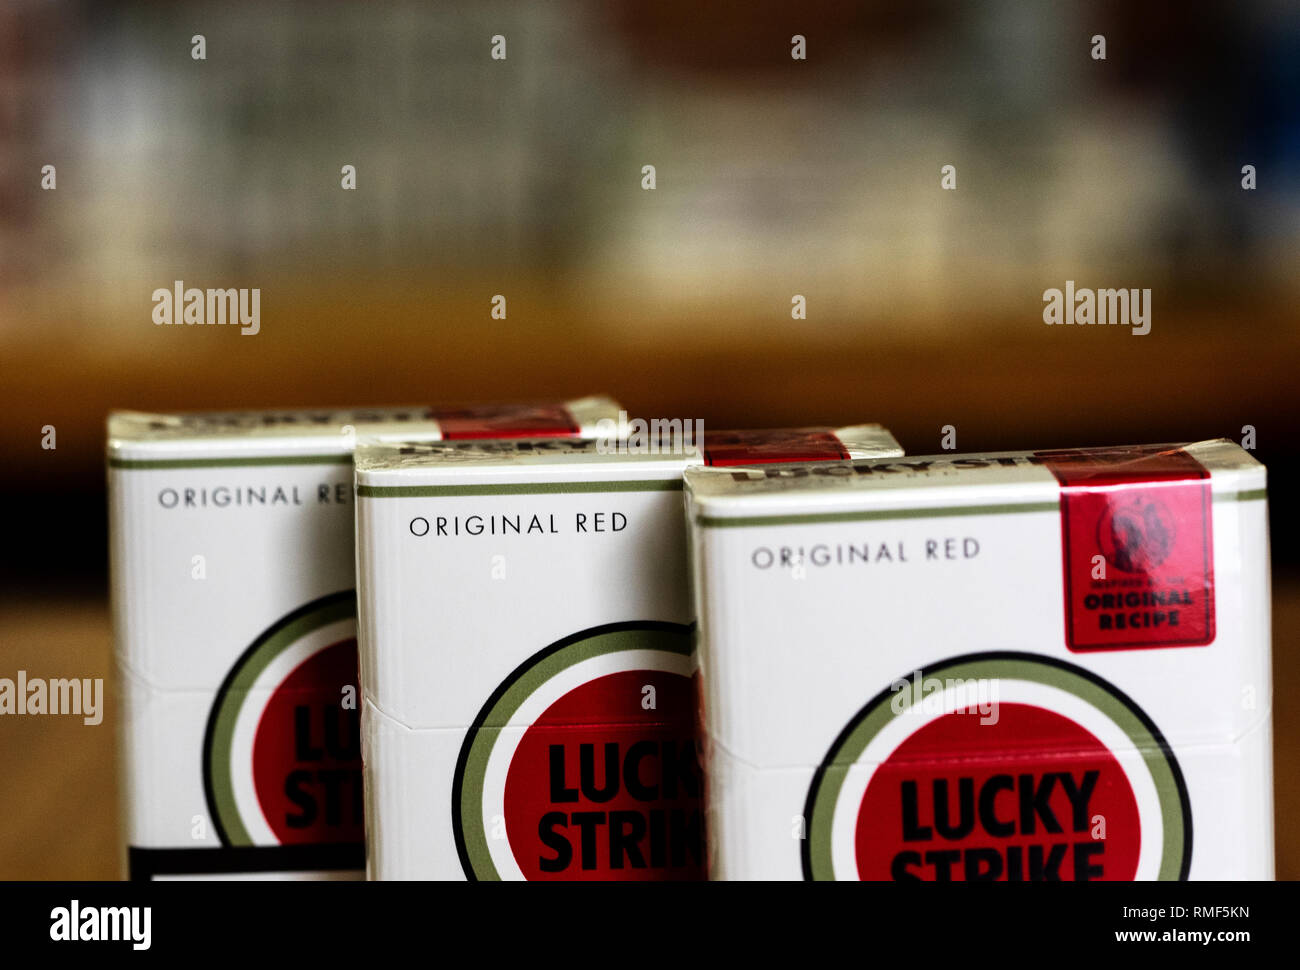 A pack of  British American Tobacco Lucky Strike cigarettes seen in a Tobacco Store. Stock Photo